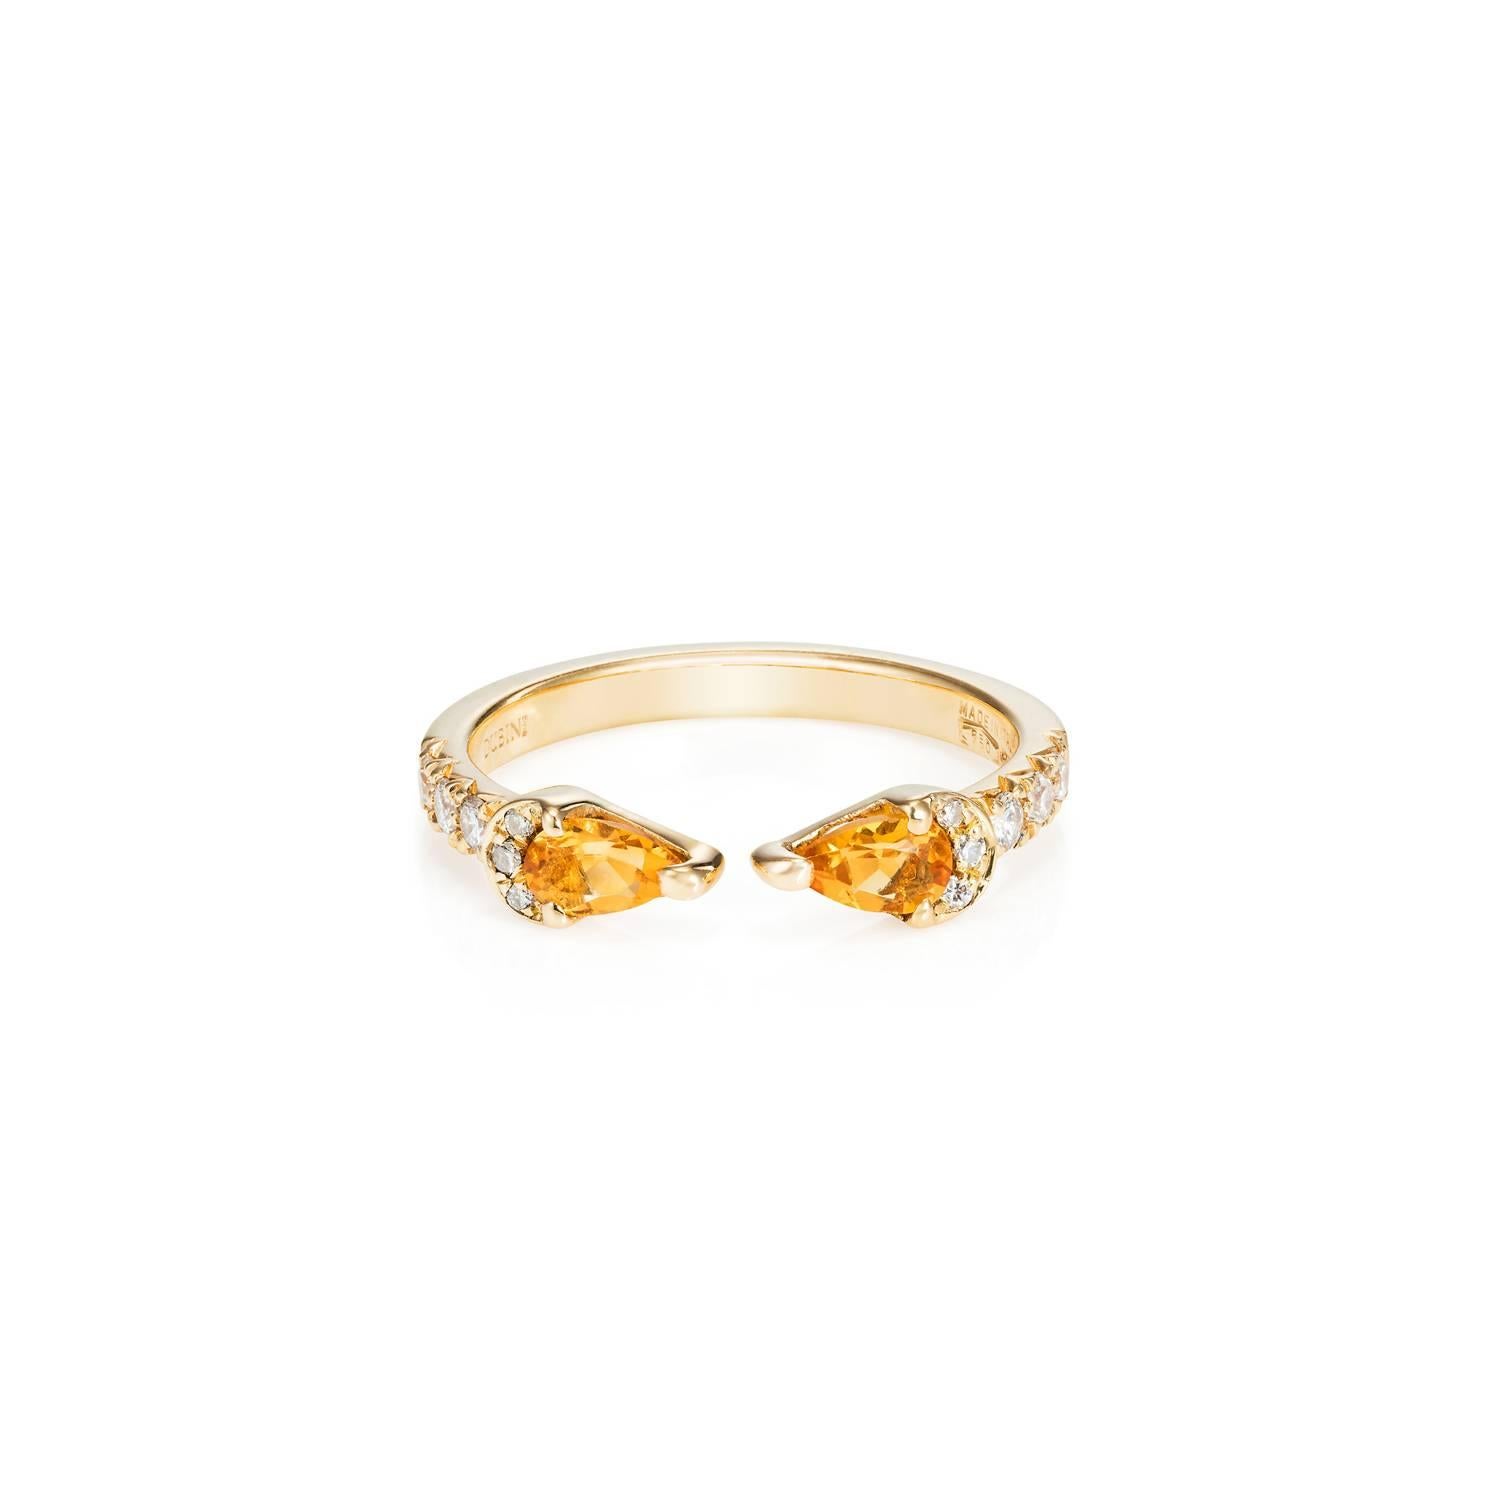 This DUBINI ring from the 'Theodora' collection features citrine drops with white diamonds set in 18K yellow gold. 

Ring size available: 53 (US 6.5)

The ring may be ordered in any size with a lead time of 3-4 weeks.

Please note that we offer a